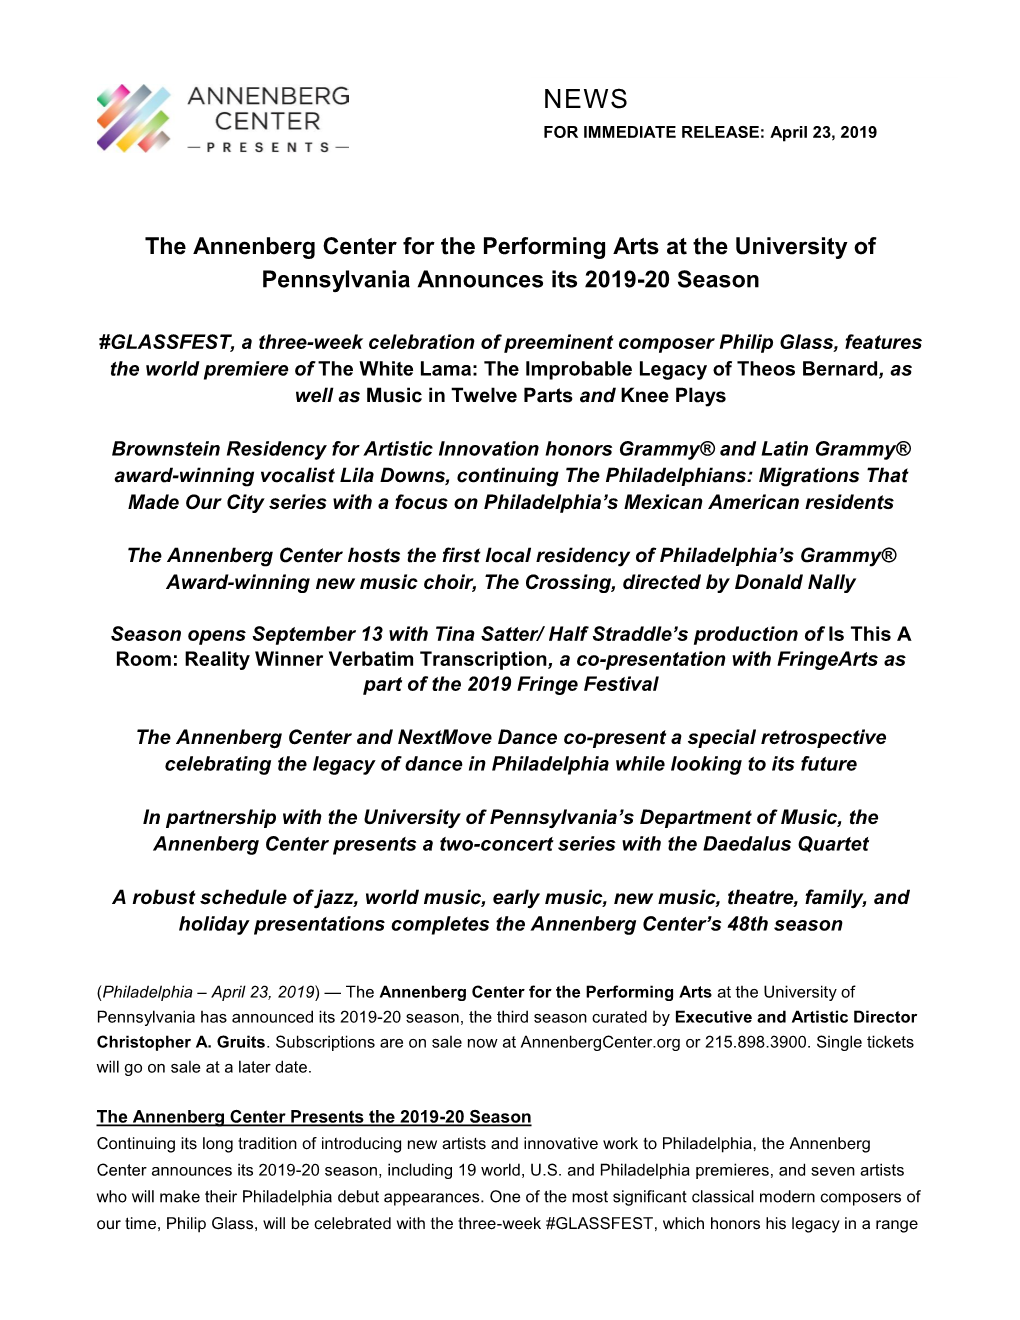 The Annenberg Center for the Performing Arts at the University of Pennsylvania Announces Its 2019-20 Season